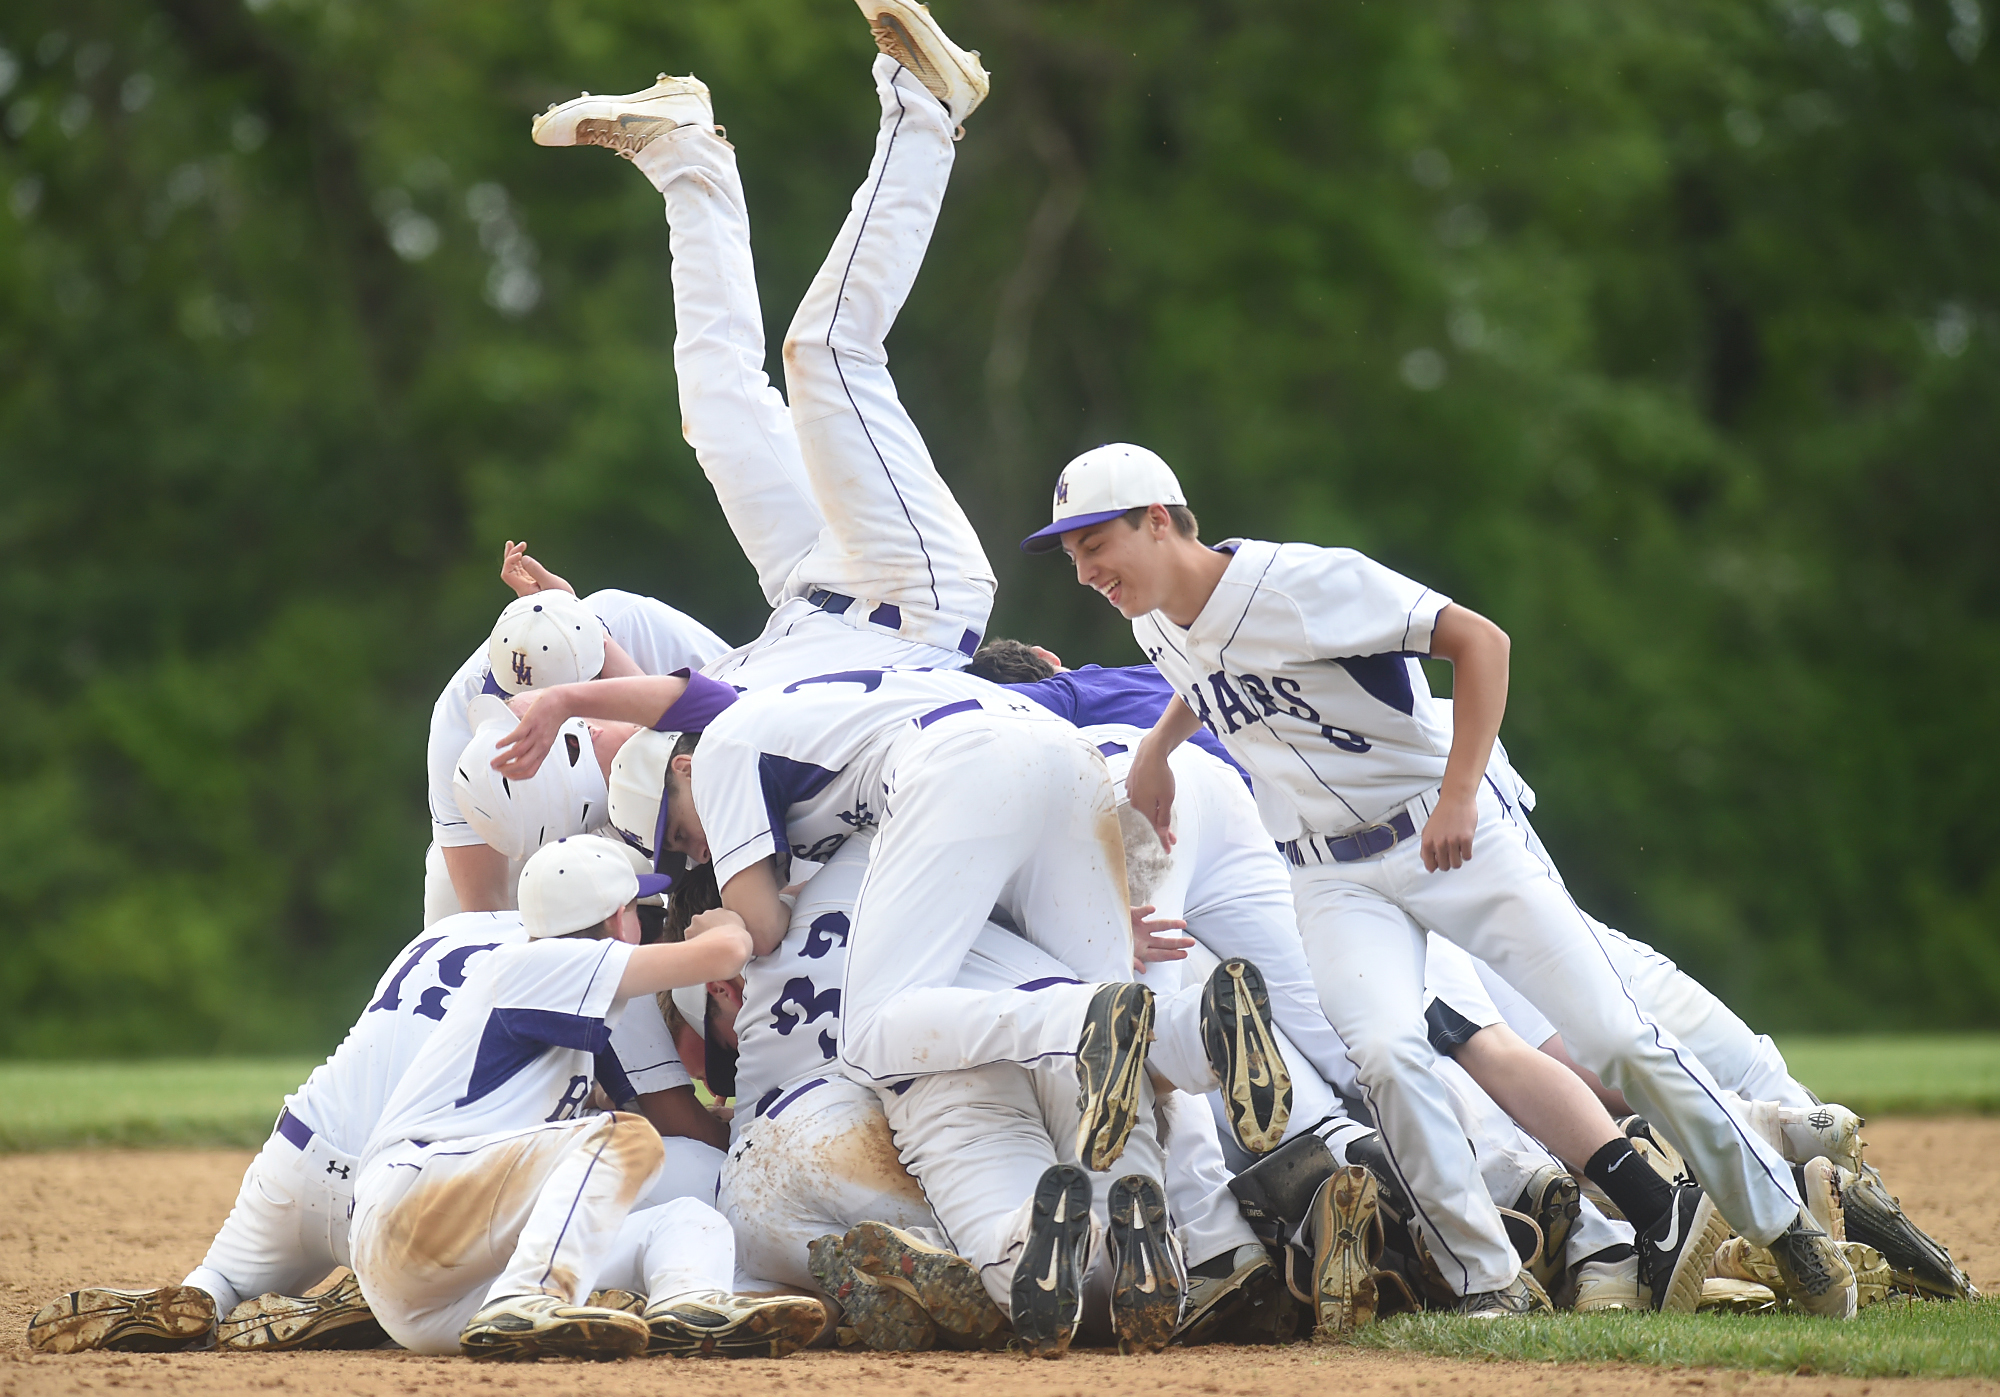  Upper Moreland players jump on top of teammate Randy Meehl (11) to celebrate after he hit a single to get a runner home in the bottom of the seventh during their game against Phoenixville in Upper Moreland./ Upper Moreland won the game 1-0. 